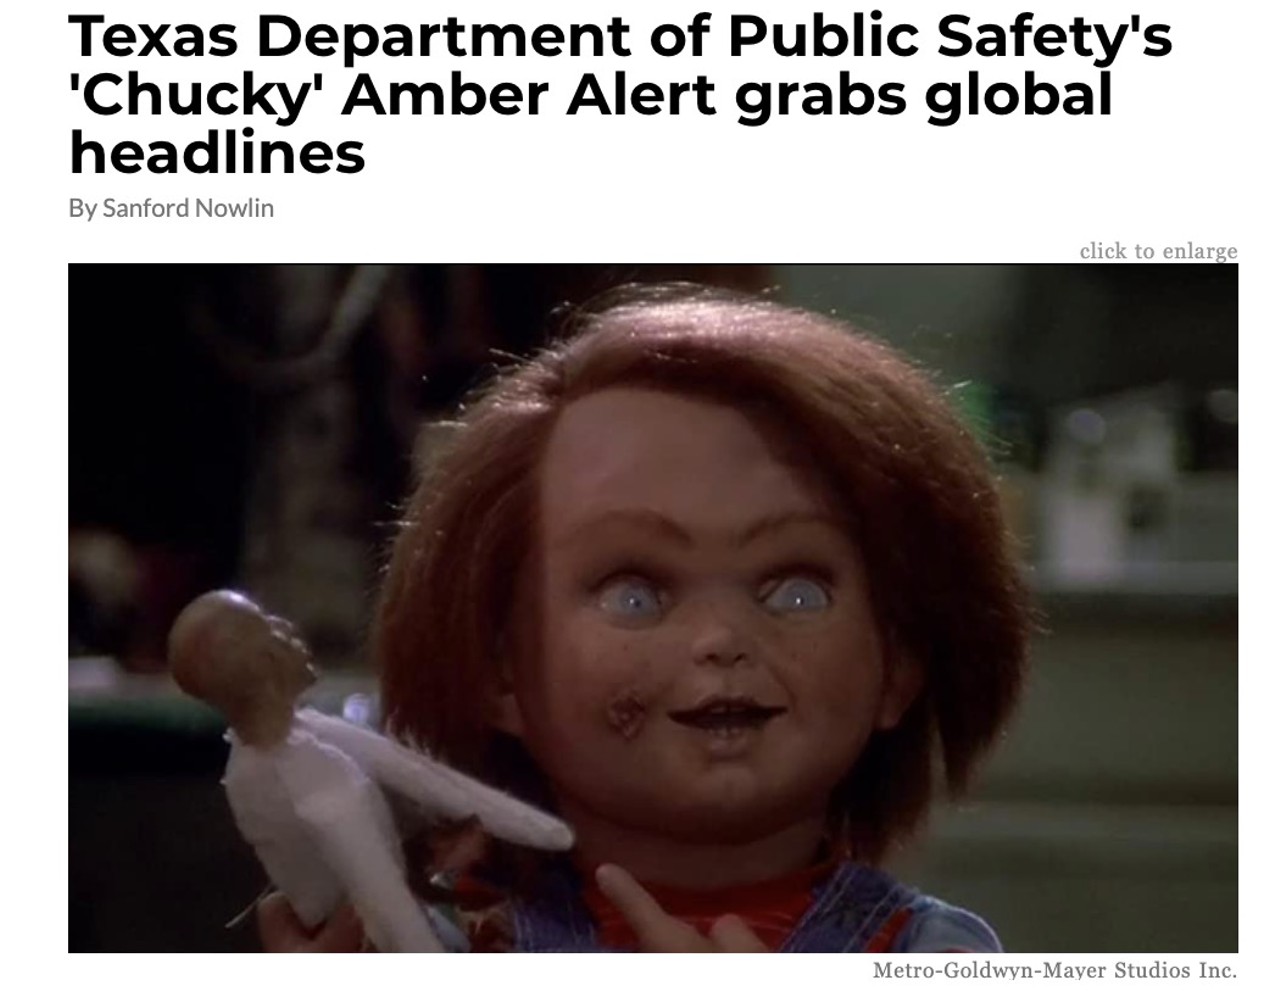 Texas Department of Public Safety's 'Chucky' Amber Alert grabs global headlines 